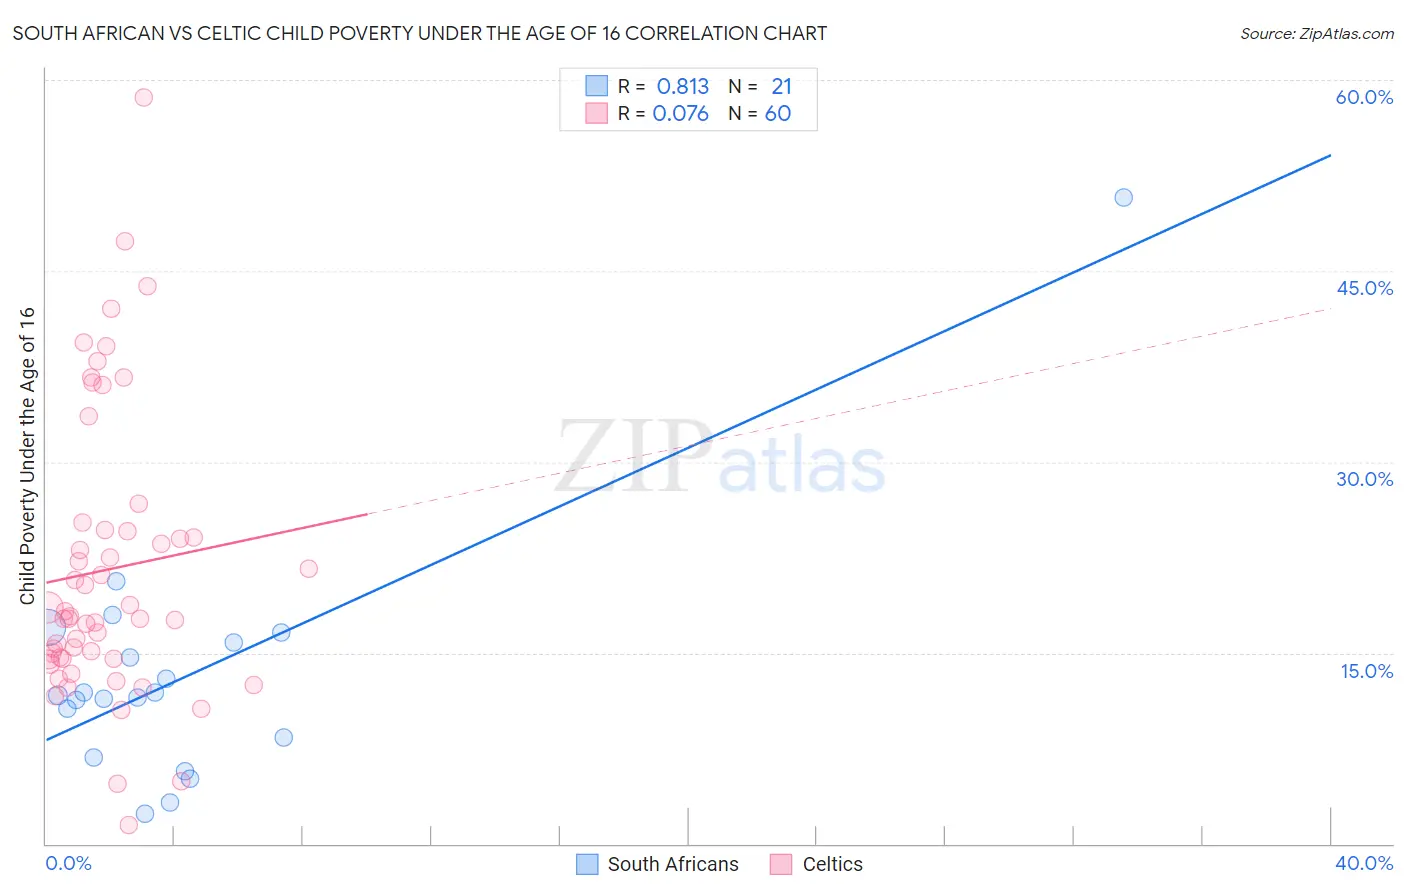 South African vs Celtic Child Poverty Under the Age of 16